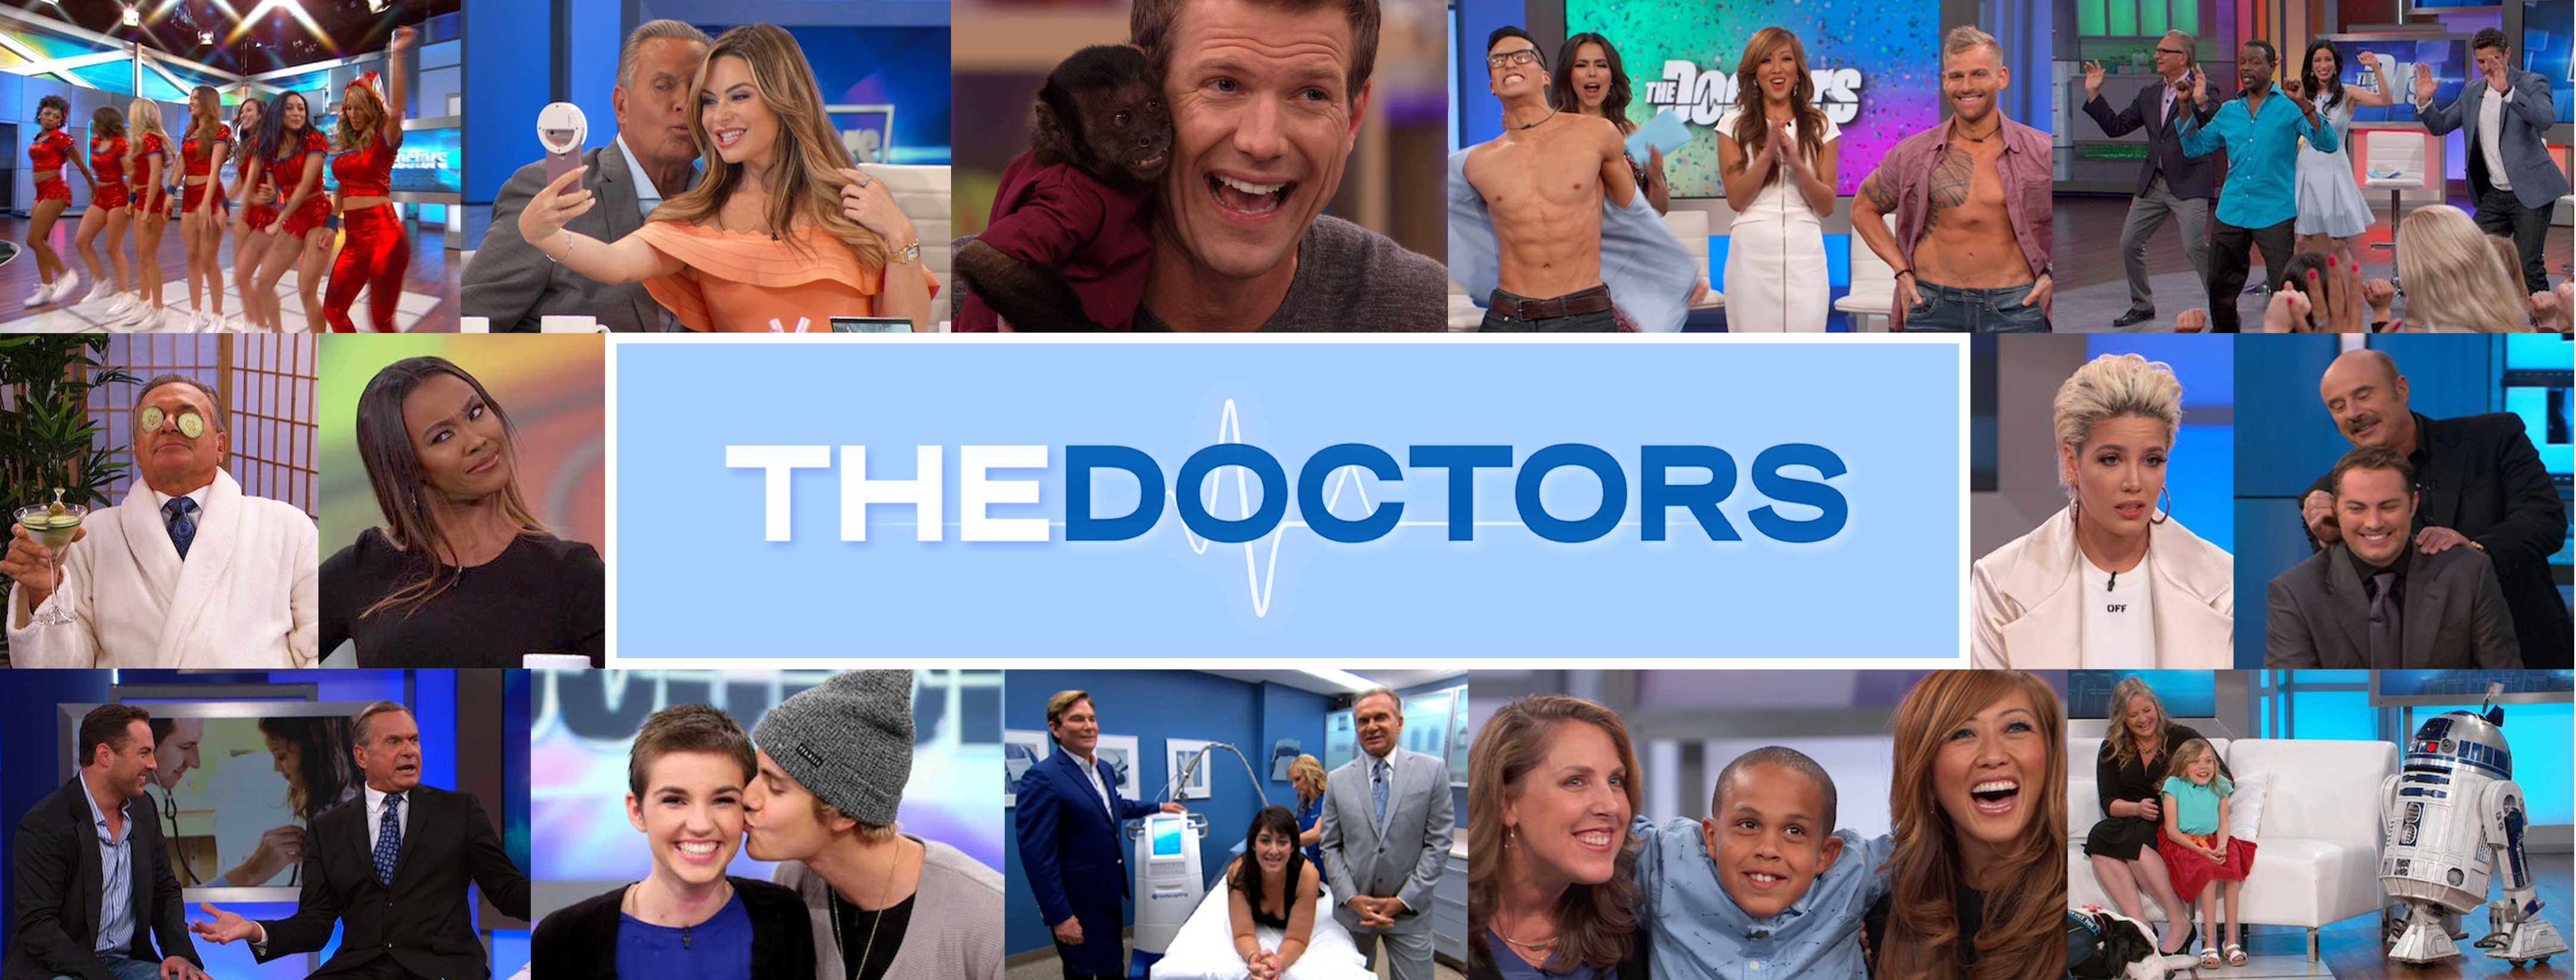 The Hunger Games Doctors Style! The Doctors TV Show